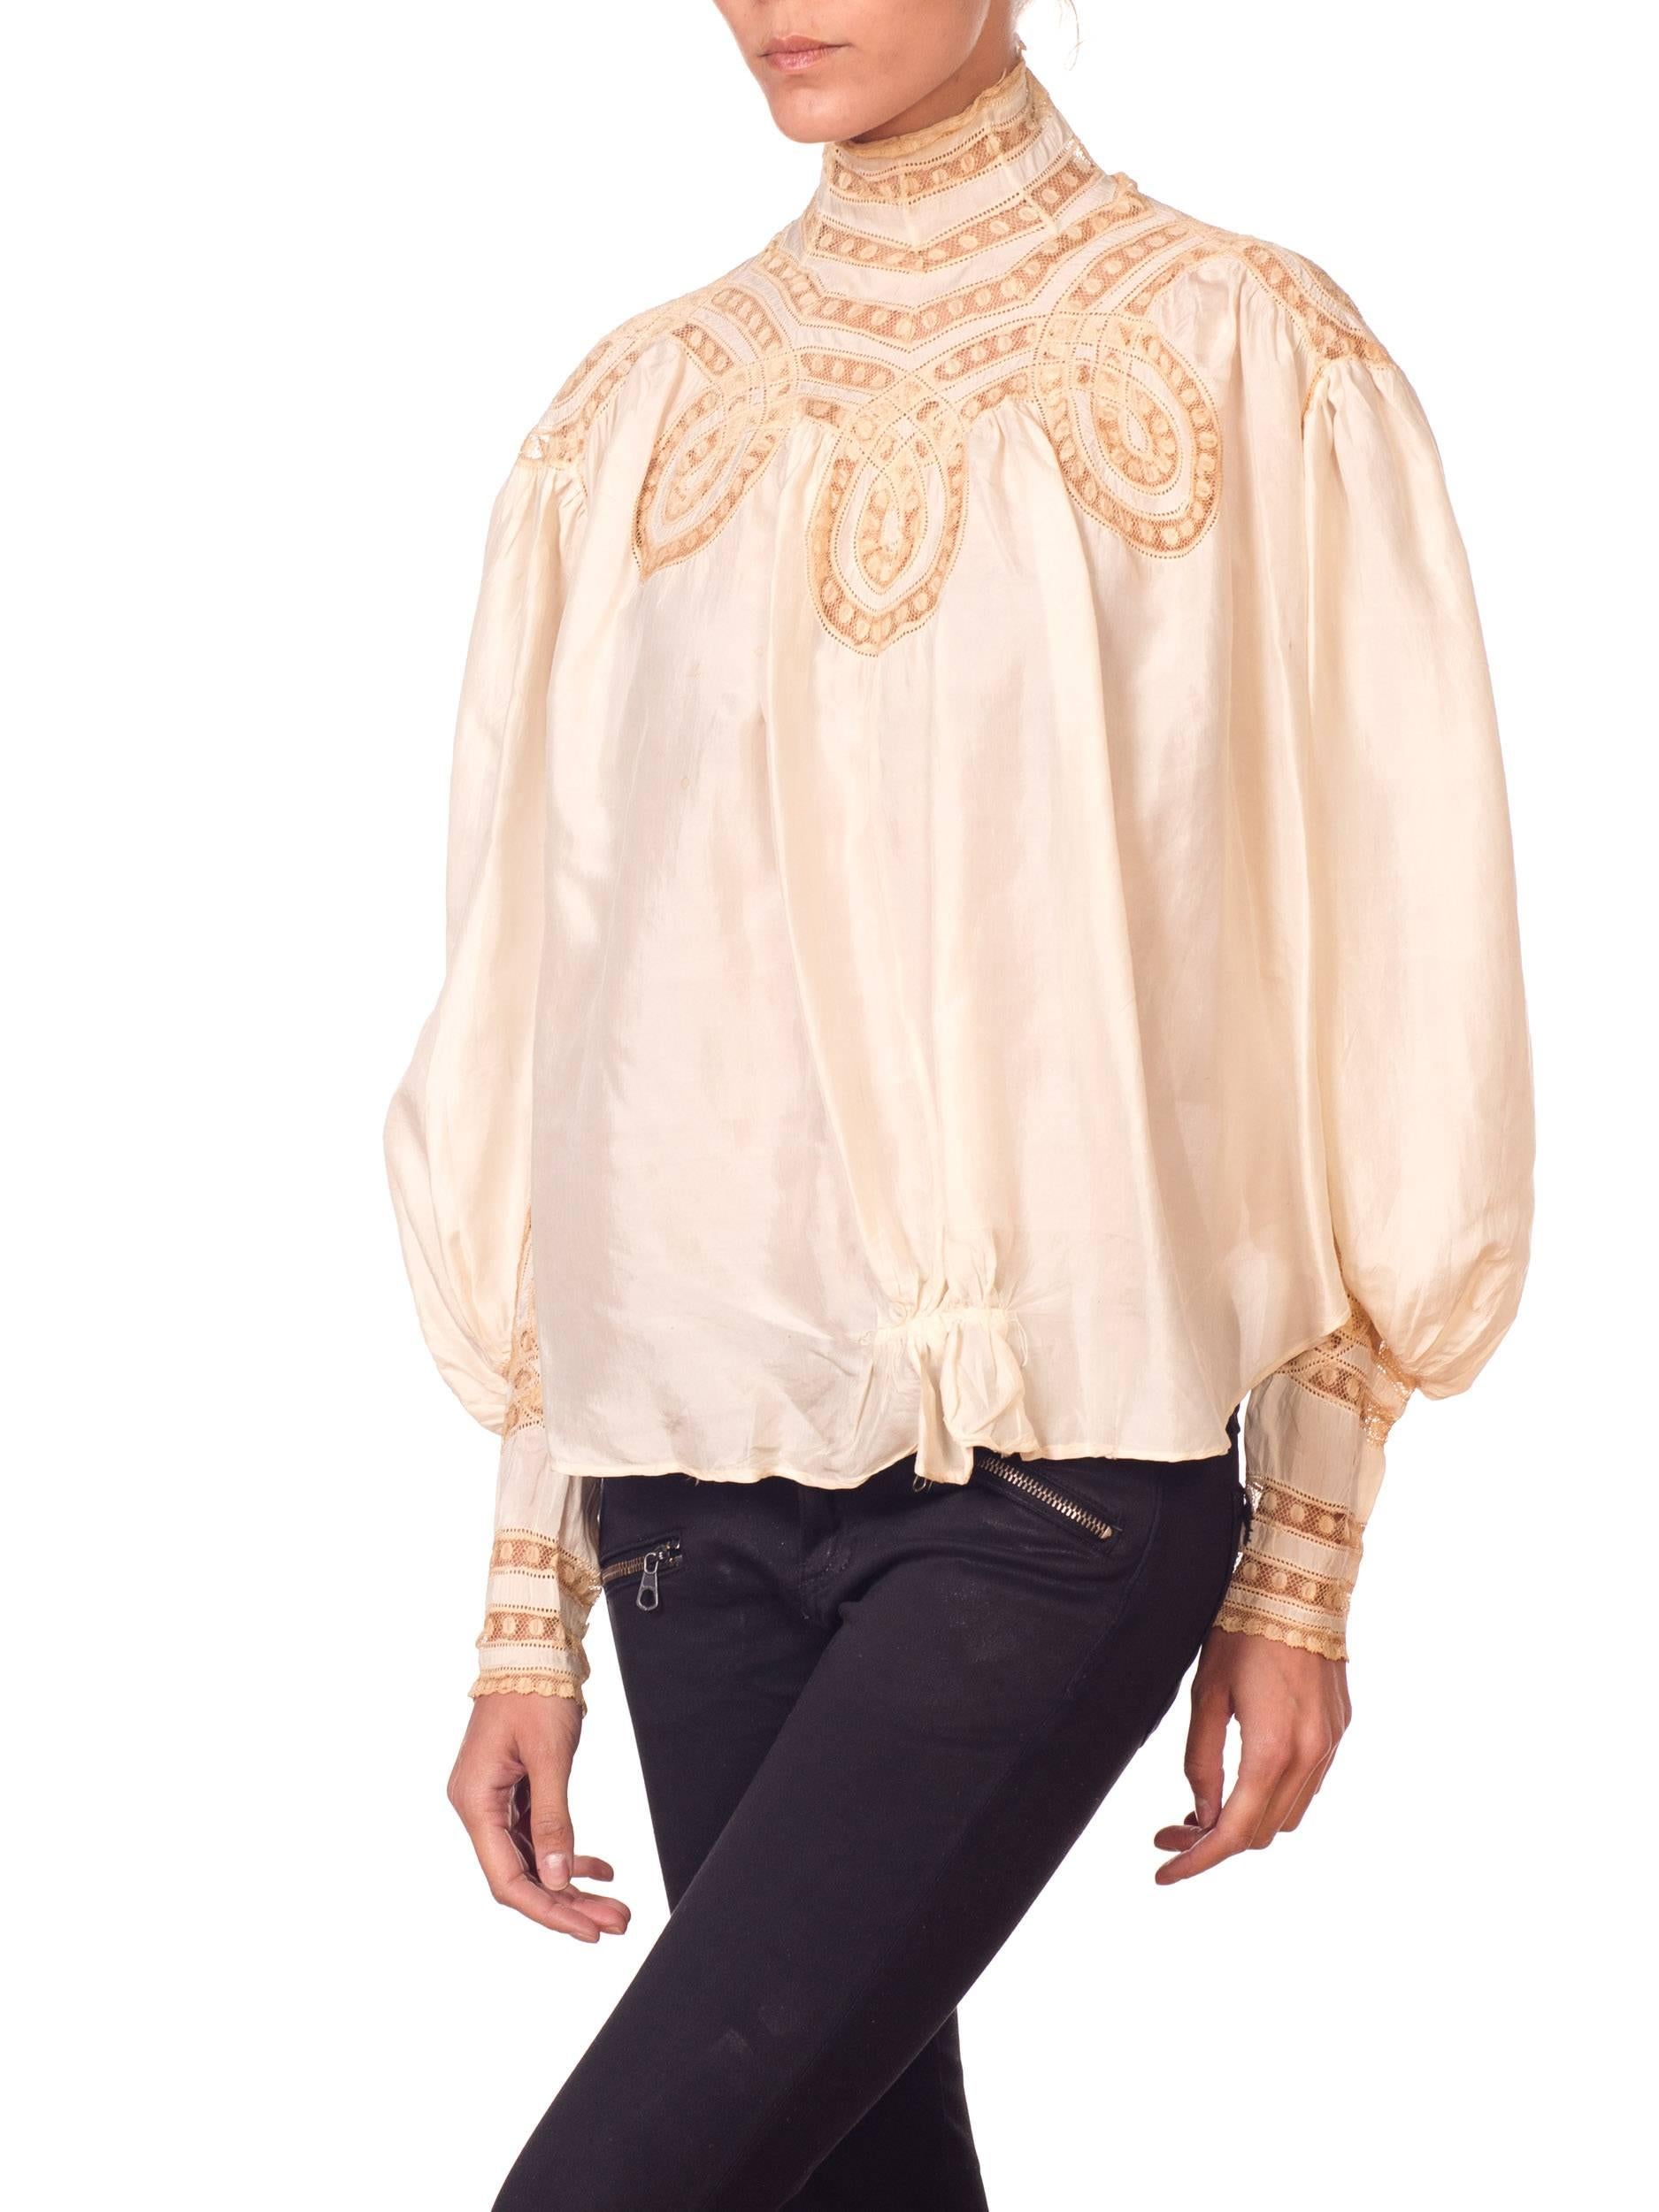 White Victorian high neck Silk Top with Swirls Of Lace Inlay Details